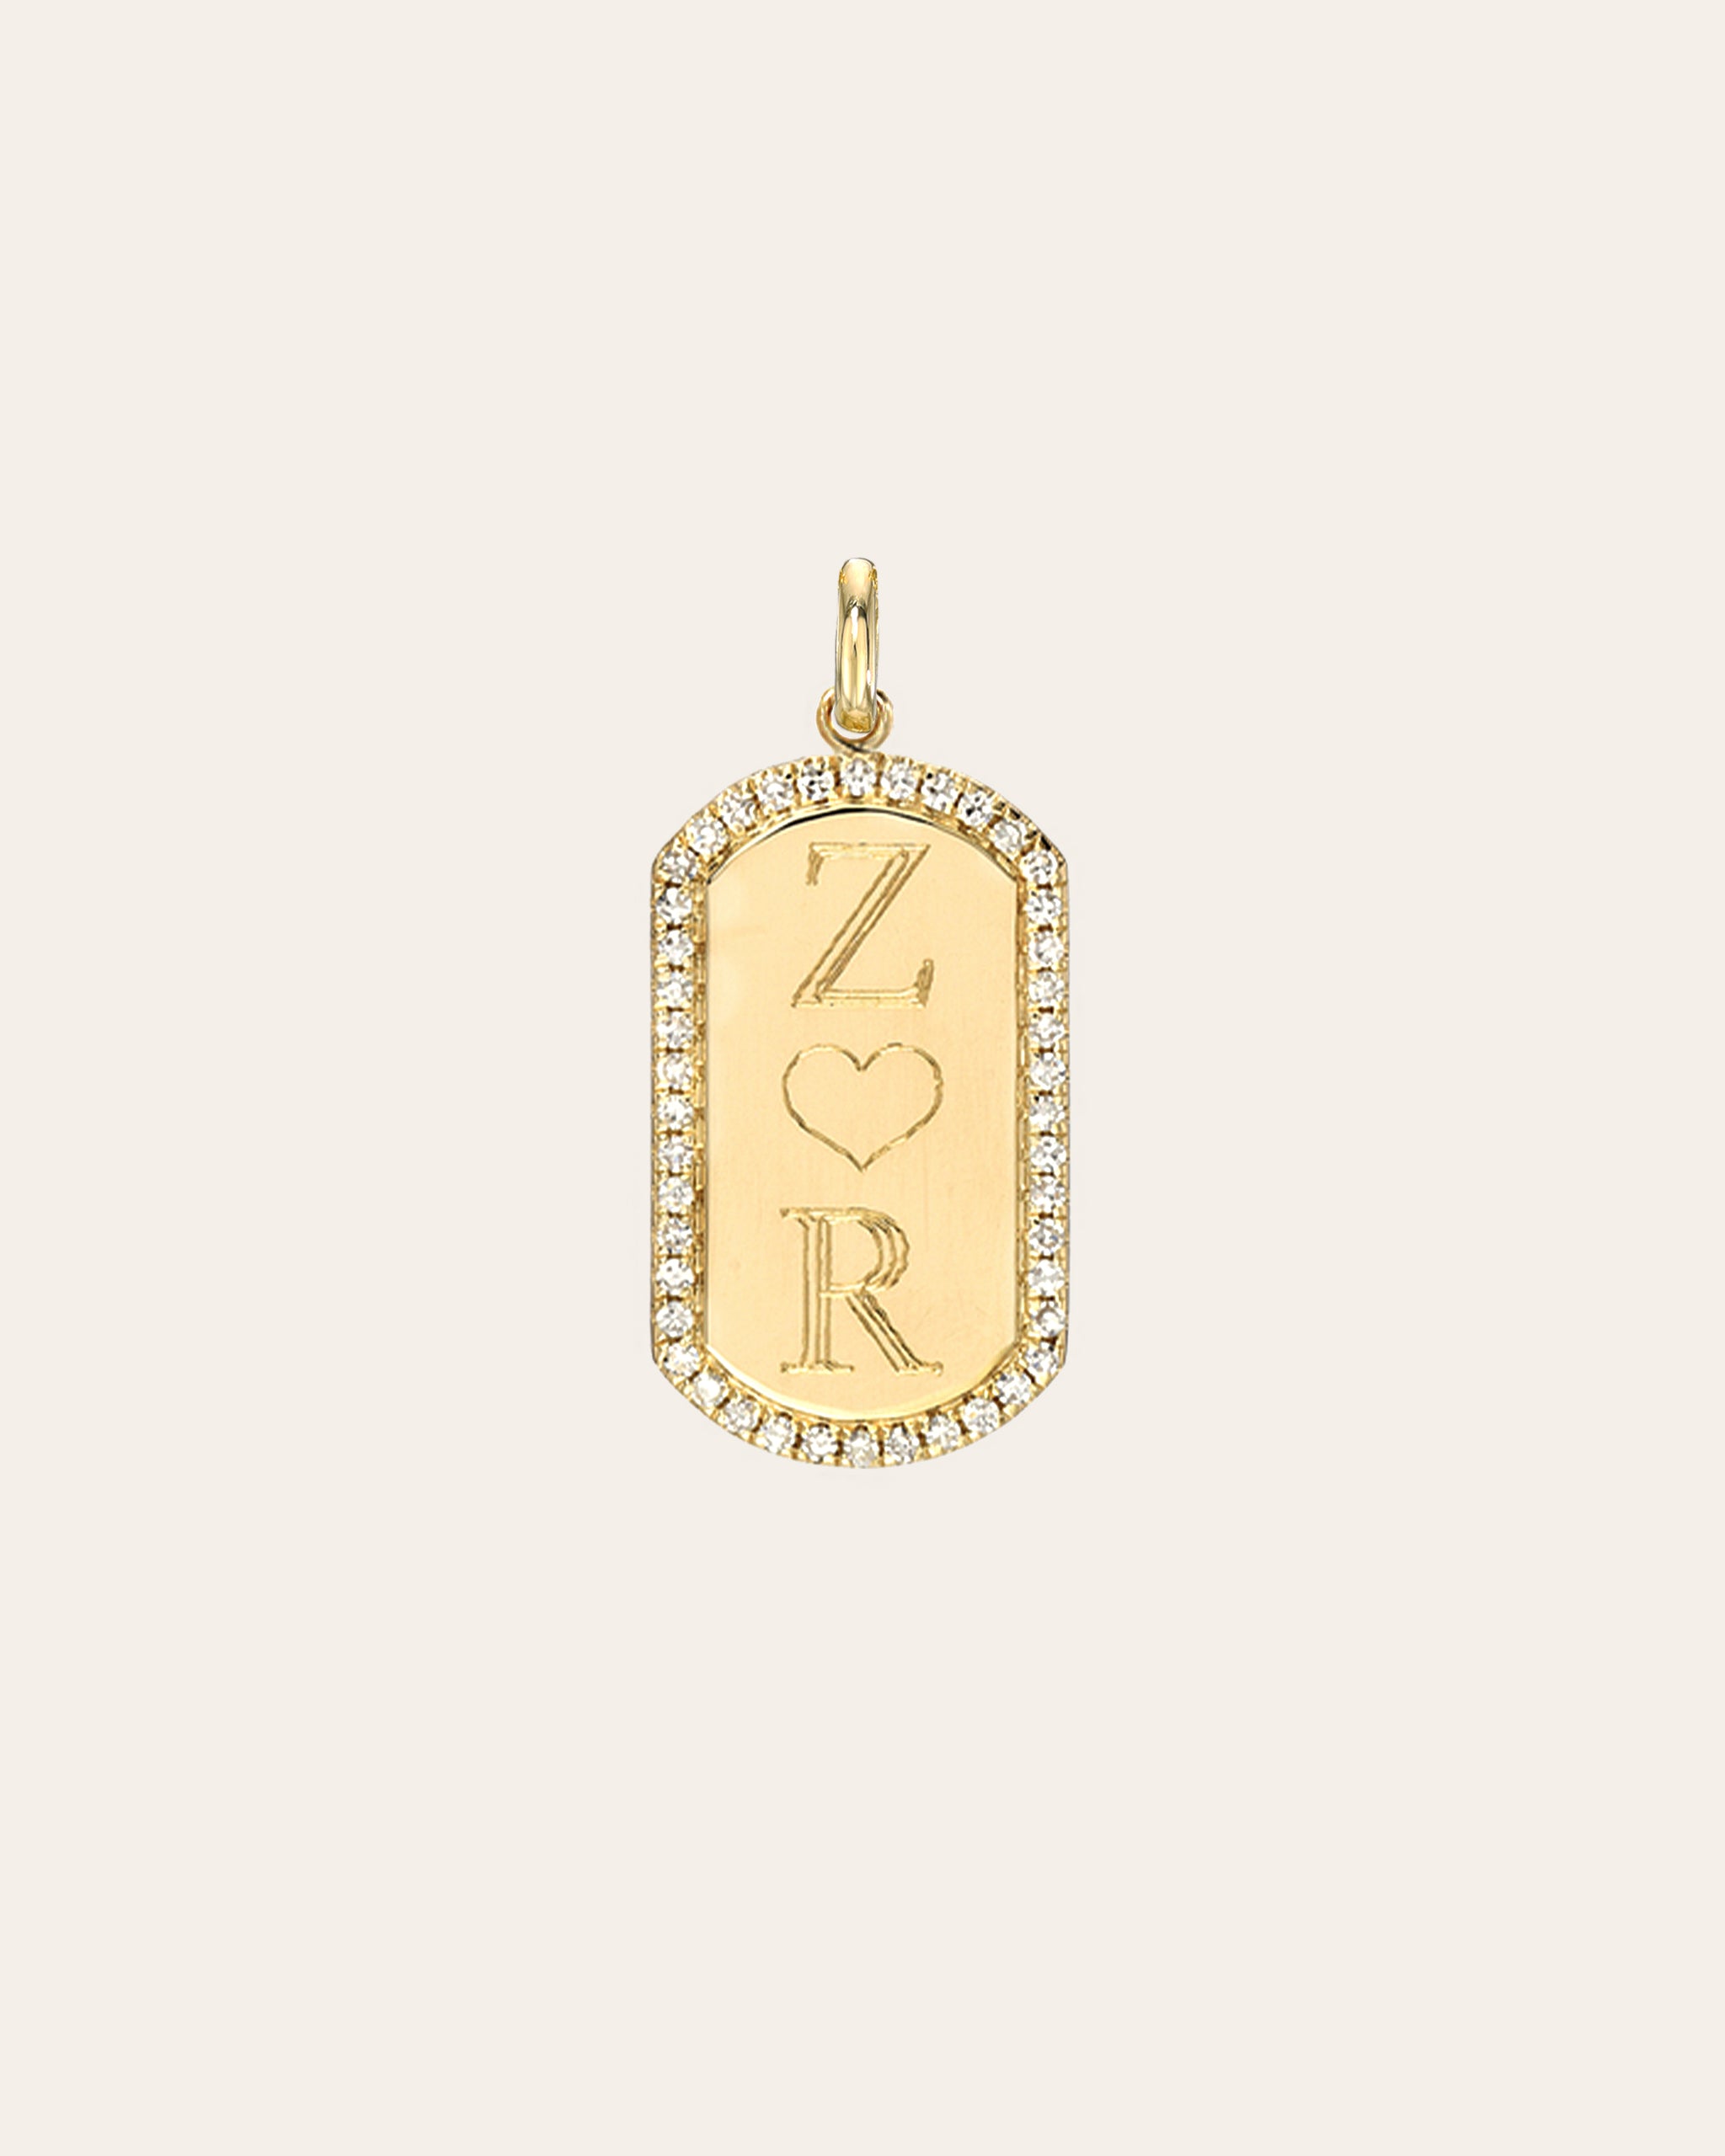 435-1071 - 14k Yellow Gold Mini Dog Tag Necklace 